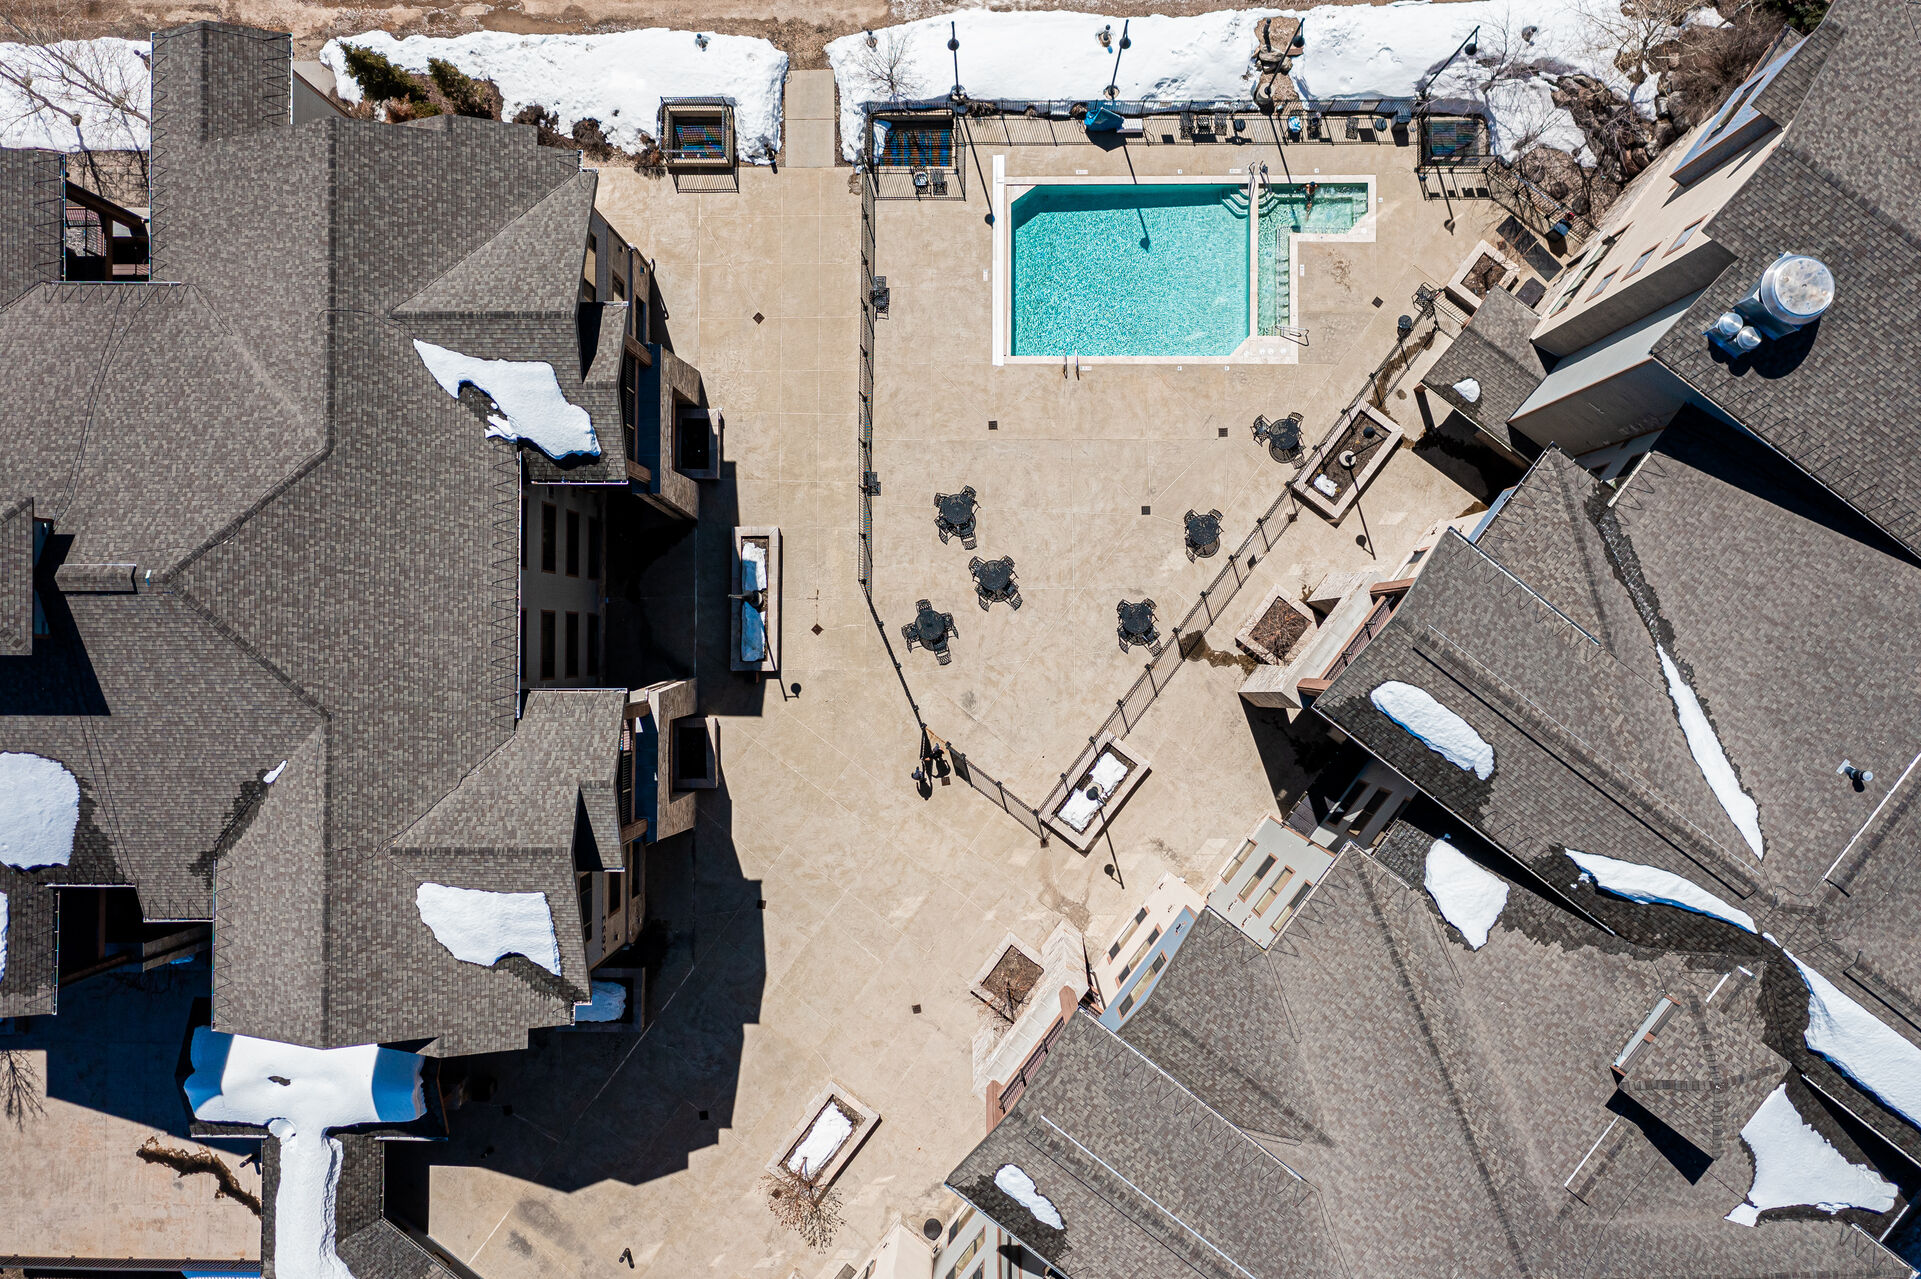 Arial photo of year round community pool and hot tub